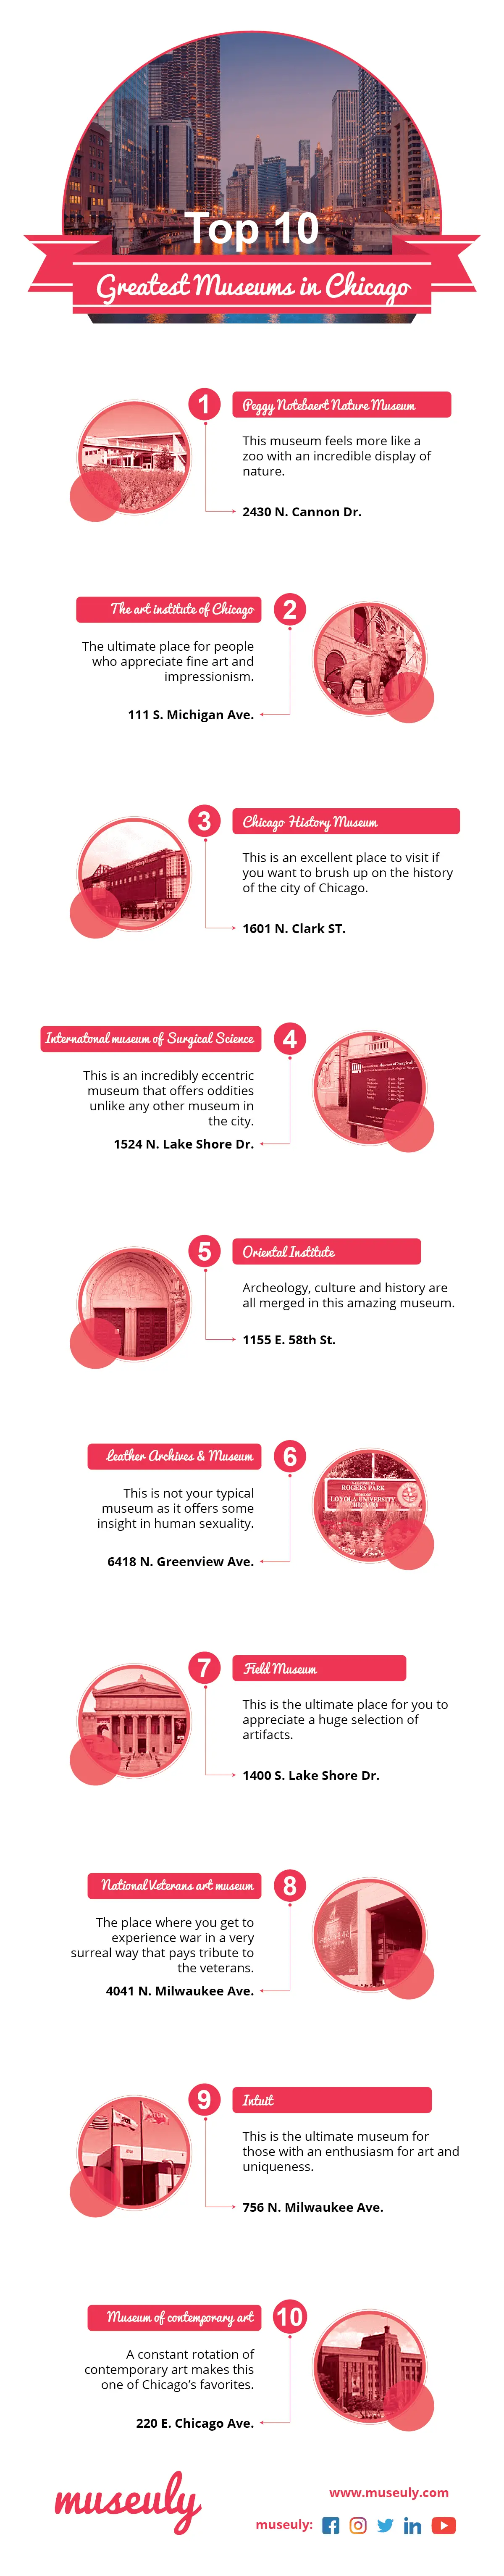 top museums in chicago infographic